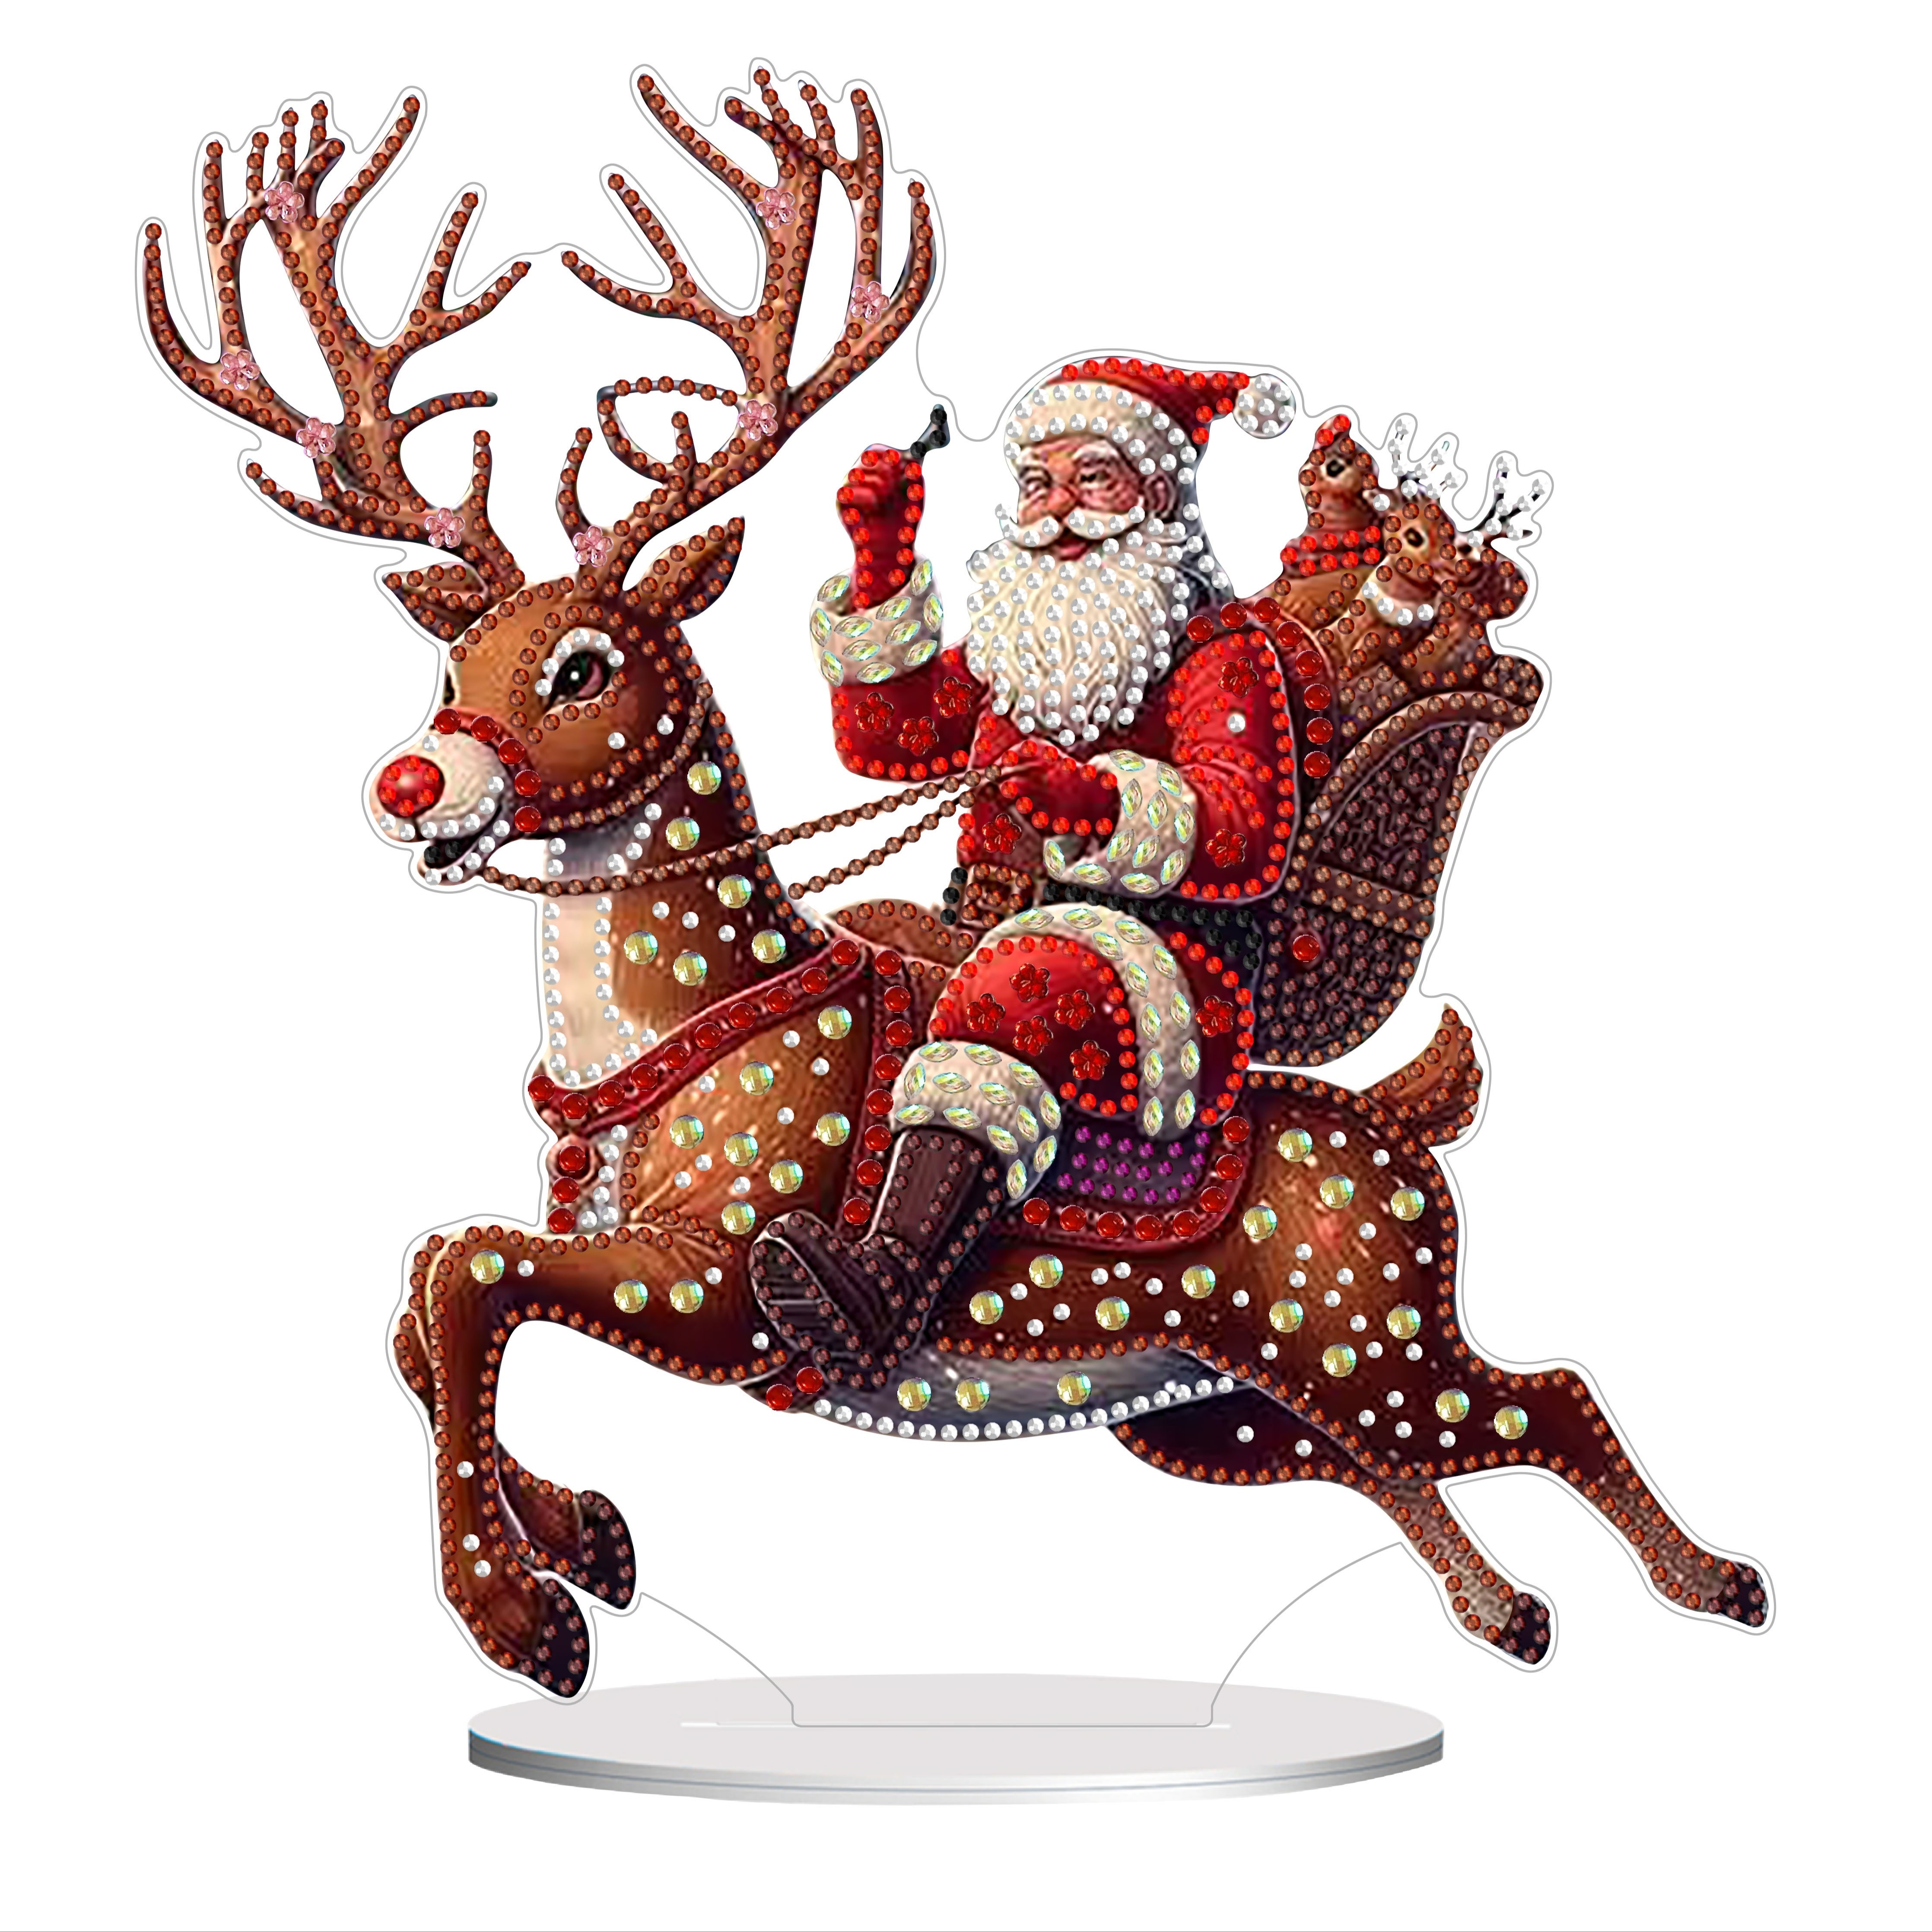 

Diy 5d Diamond Painting Santa Claus Reindeer Acrylic Ornament Kit, Unique Mosaic Art Craft, Festive Tabletop Decor, Acrylic Material, Creative Home Bedroom Decorative Accessory With Gift Box